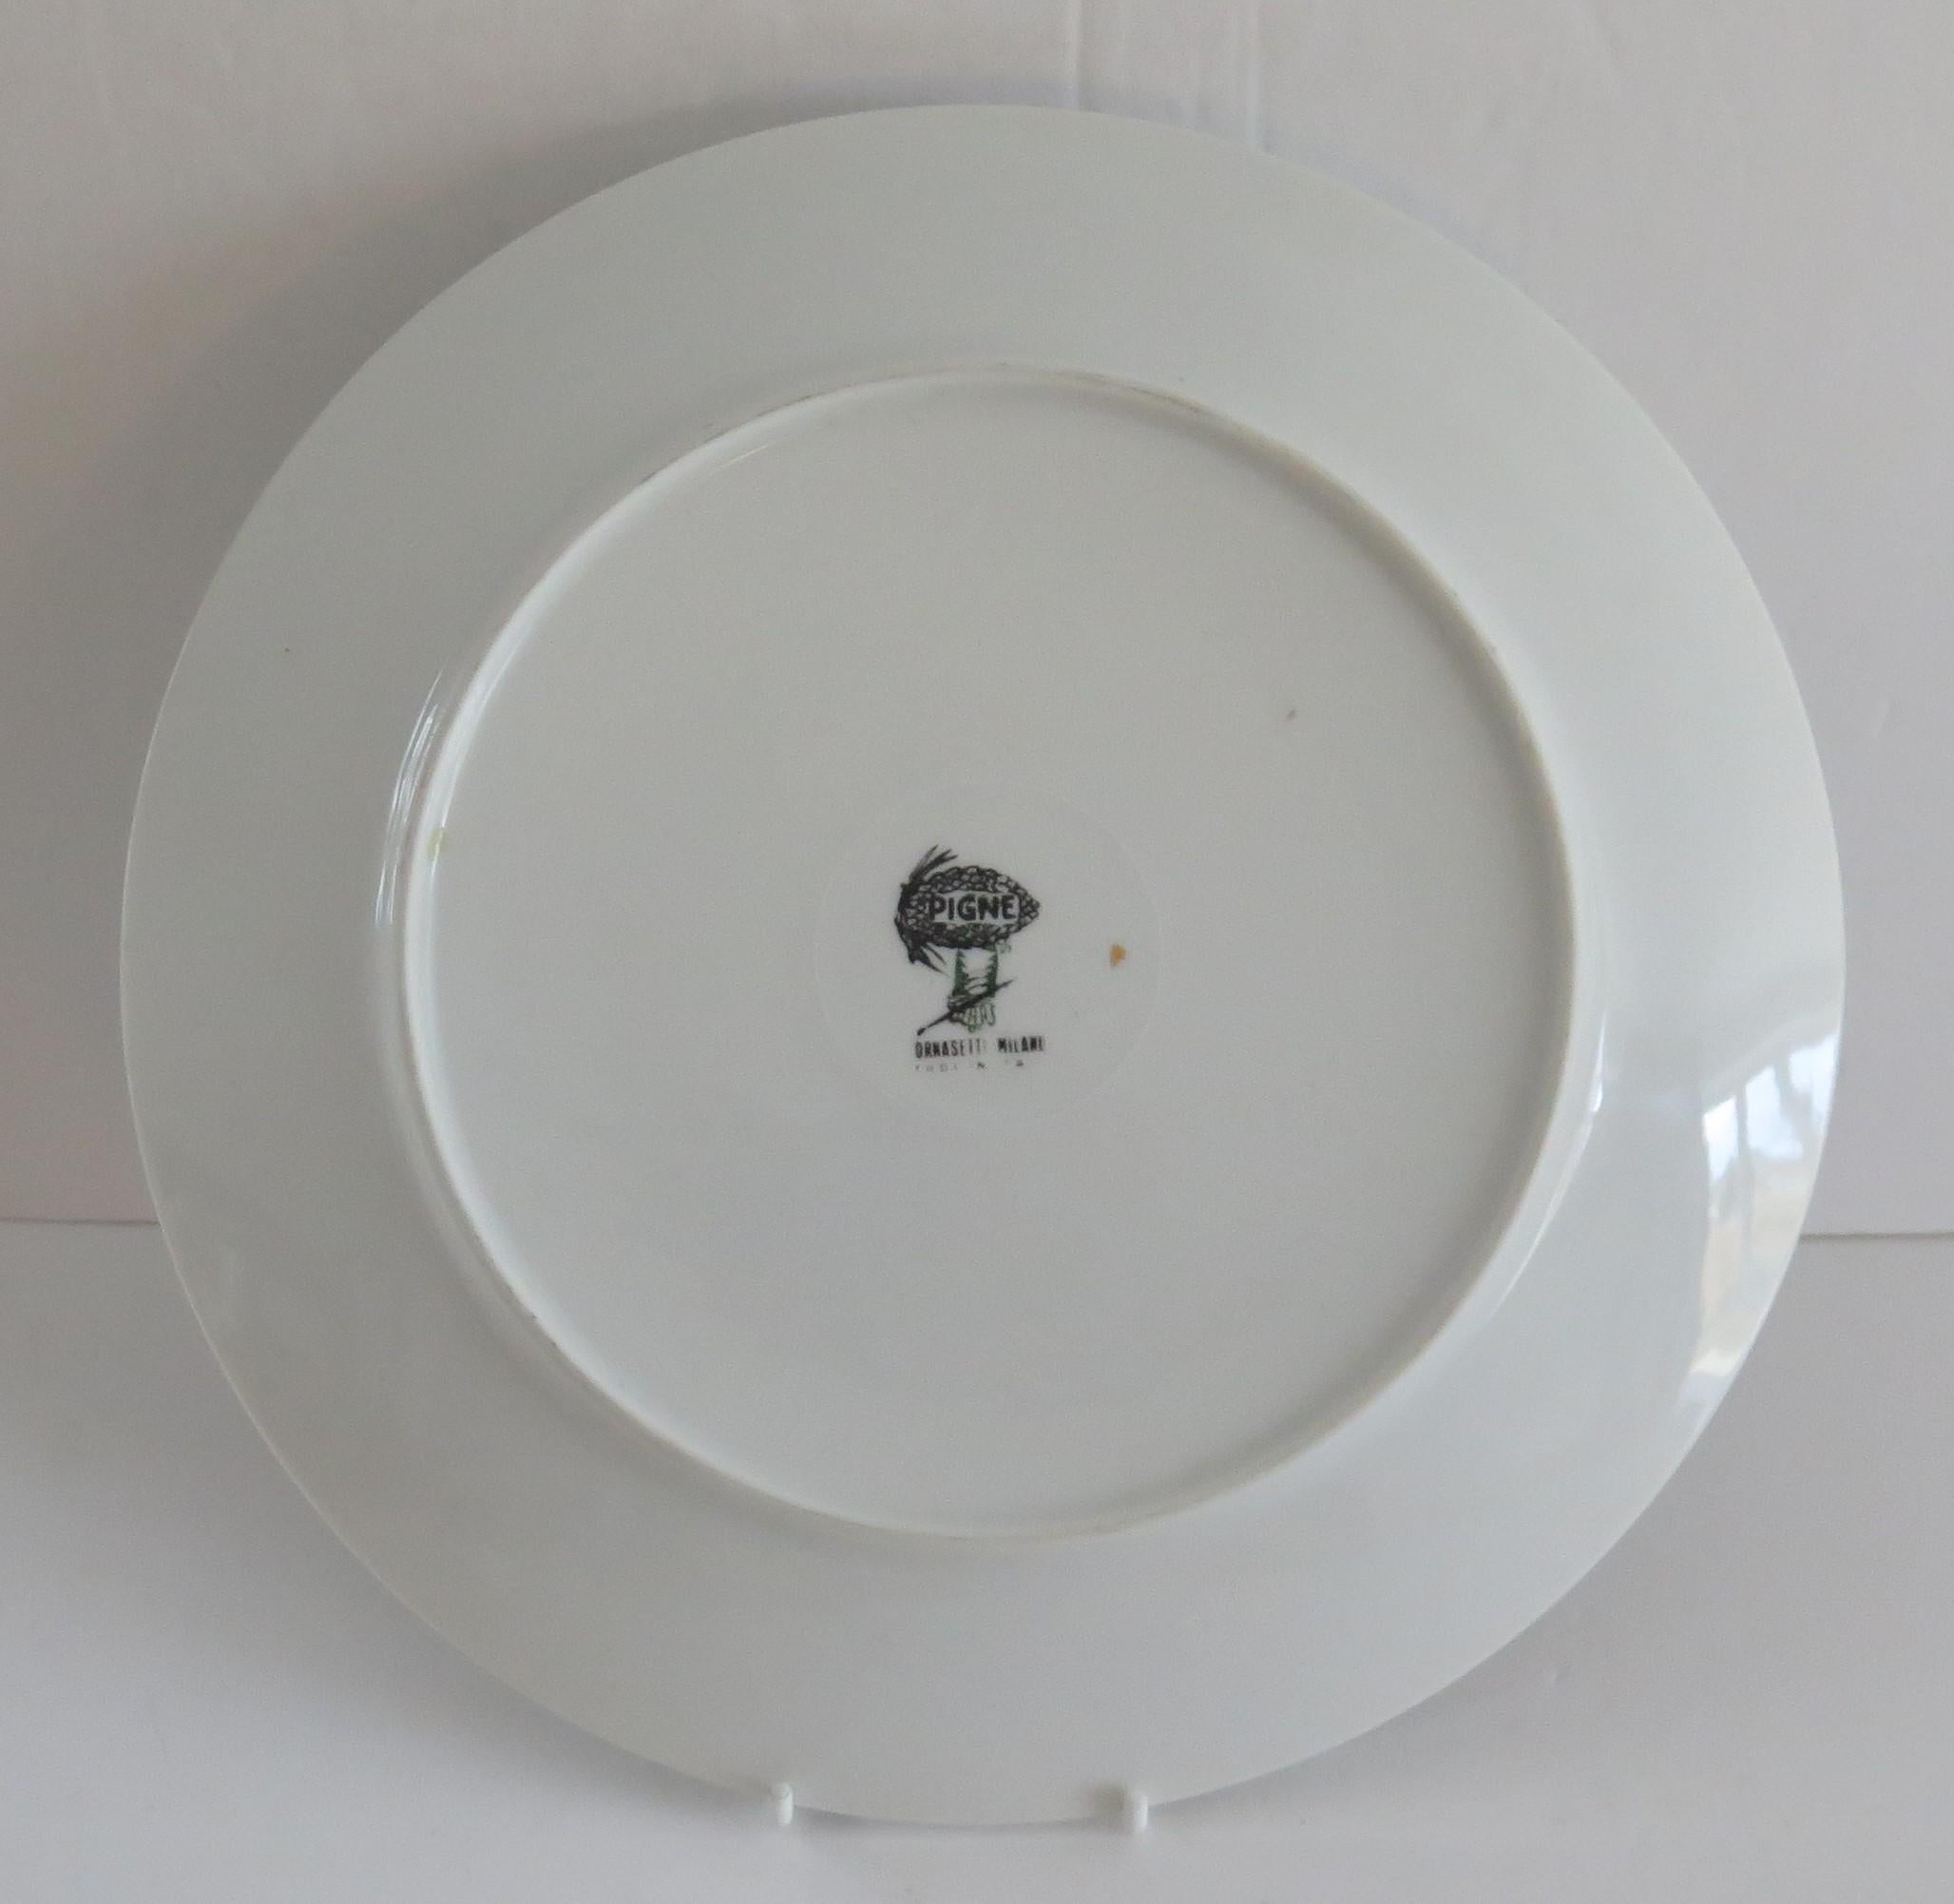 20th Century Piero Fornasetti Large Plate Gilded Acorn Ptn from Pigne Series, Circa 1950s For Sale